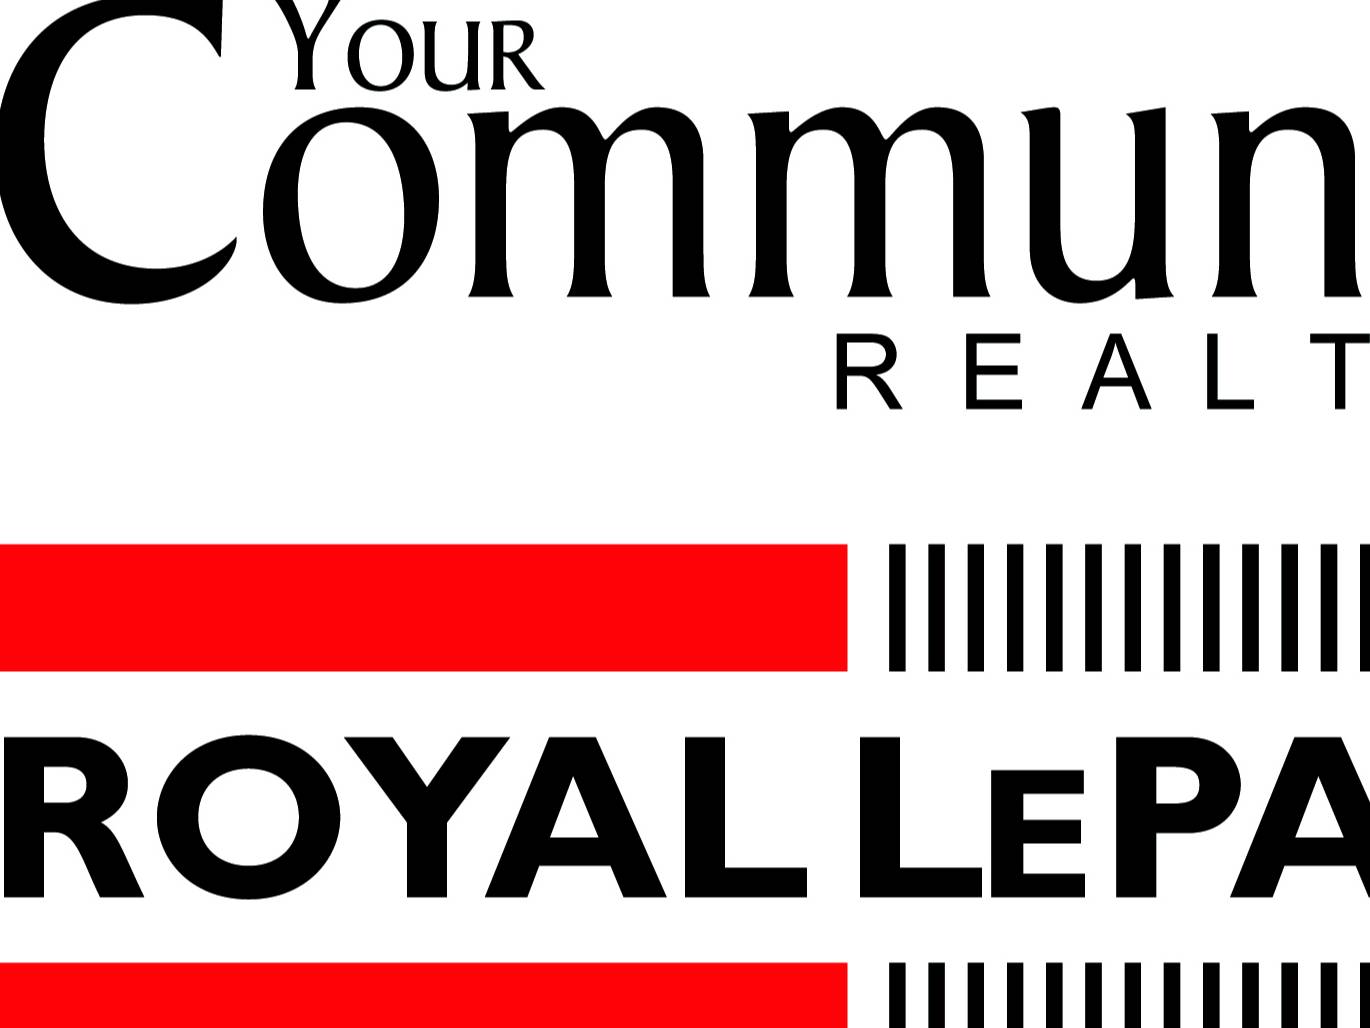 Royal LePage Your Community Realty - 12942 KEELE  STREET, KING CITY, ON, L7B 1H8